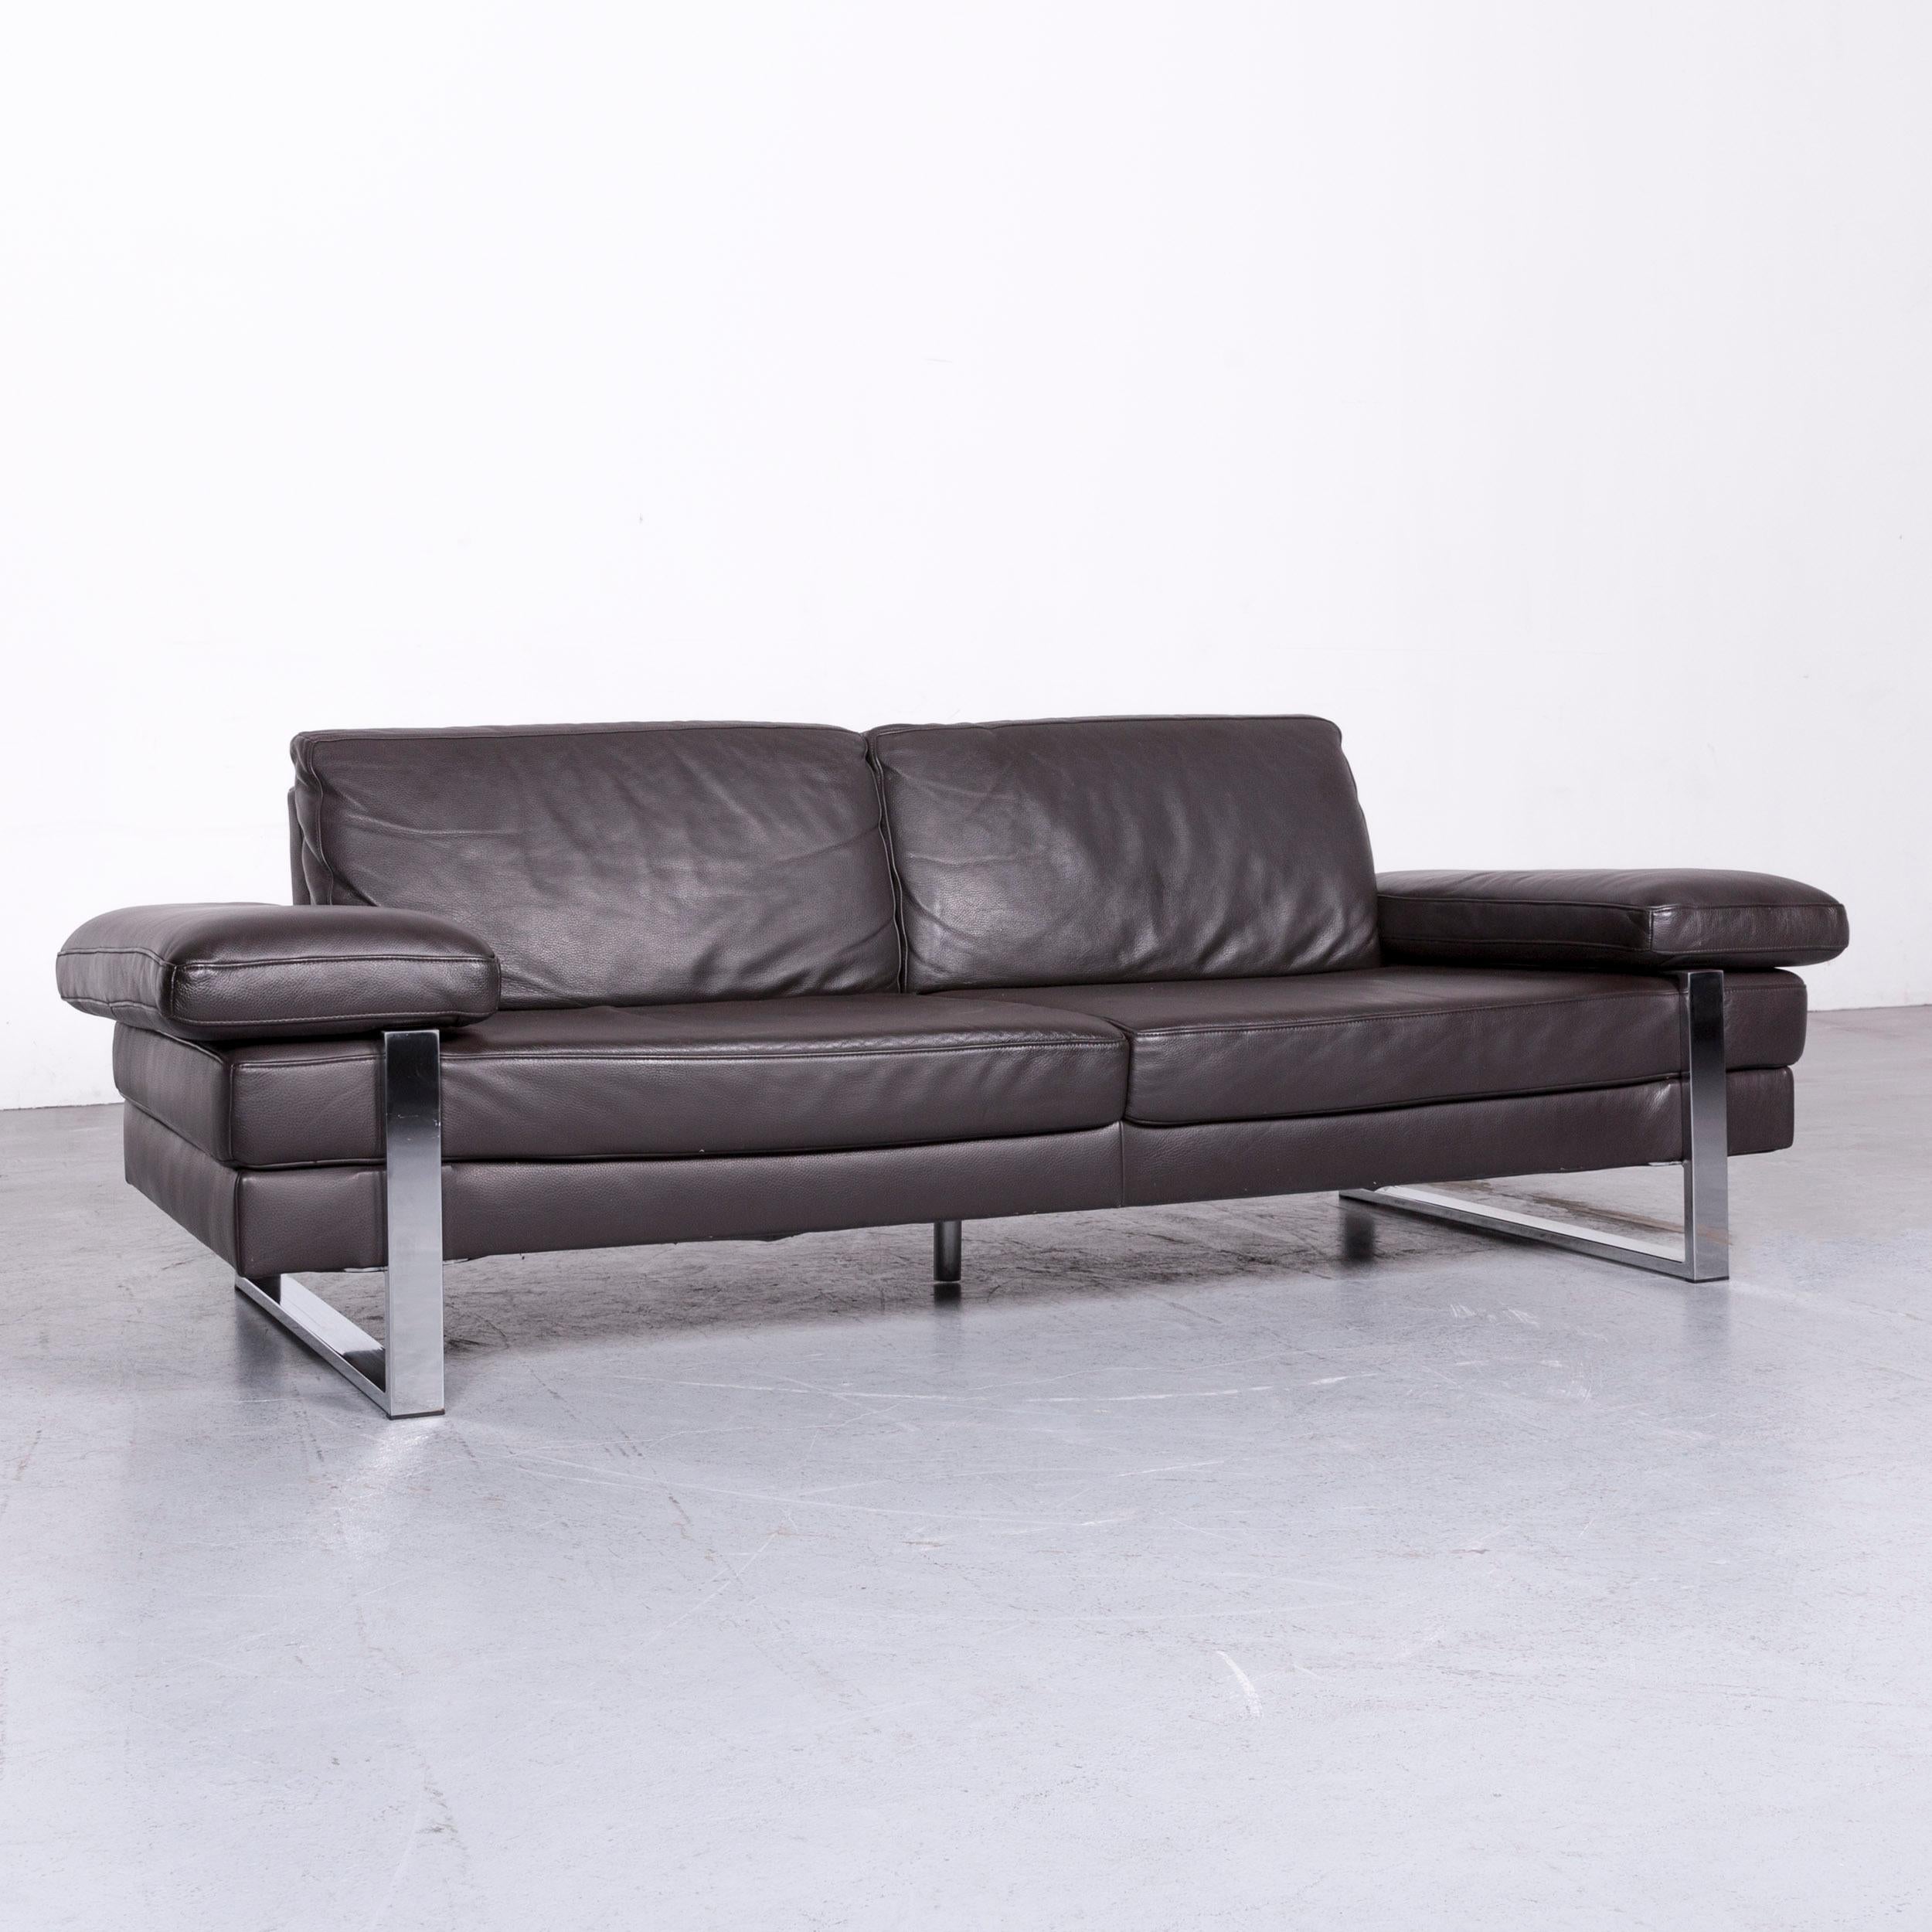 We bring to you an Ewald Schillig designer sofa brown three-seat couch leather.